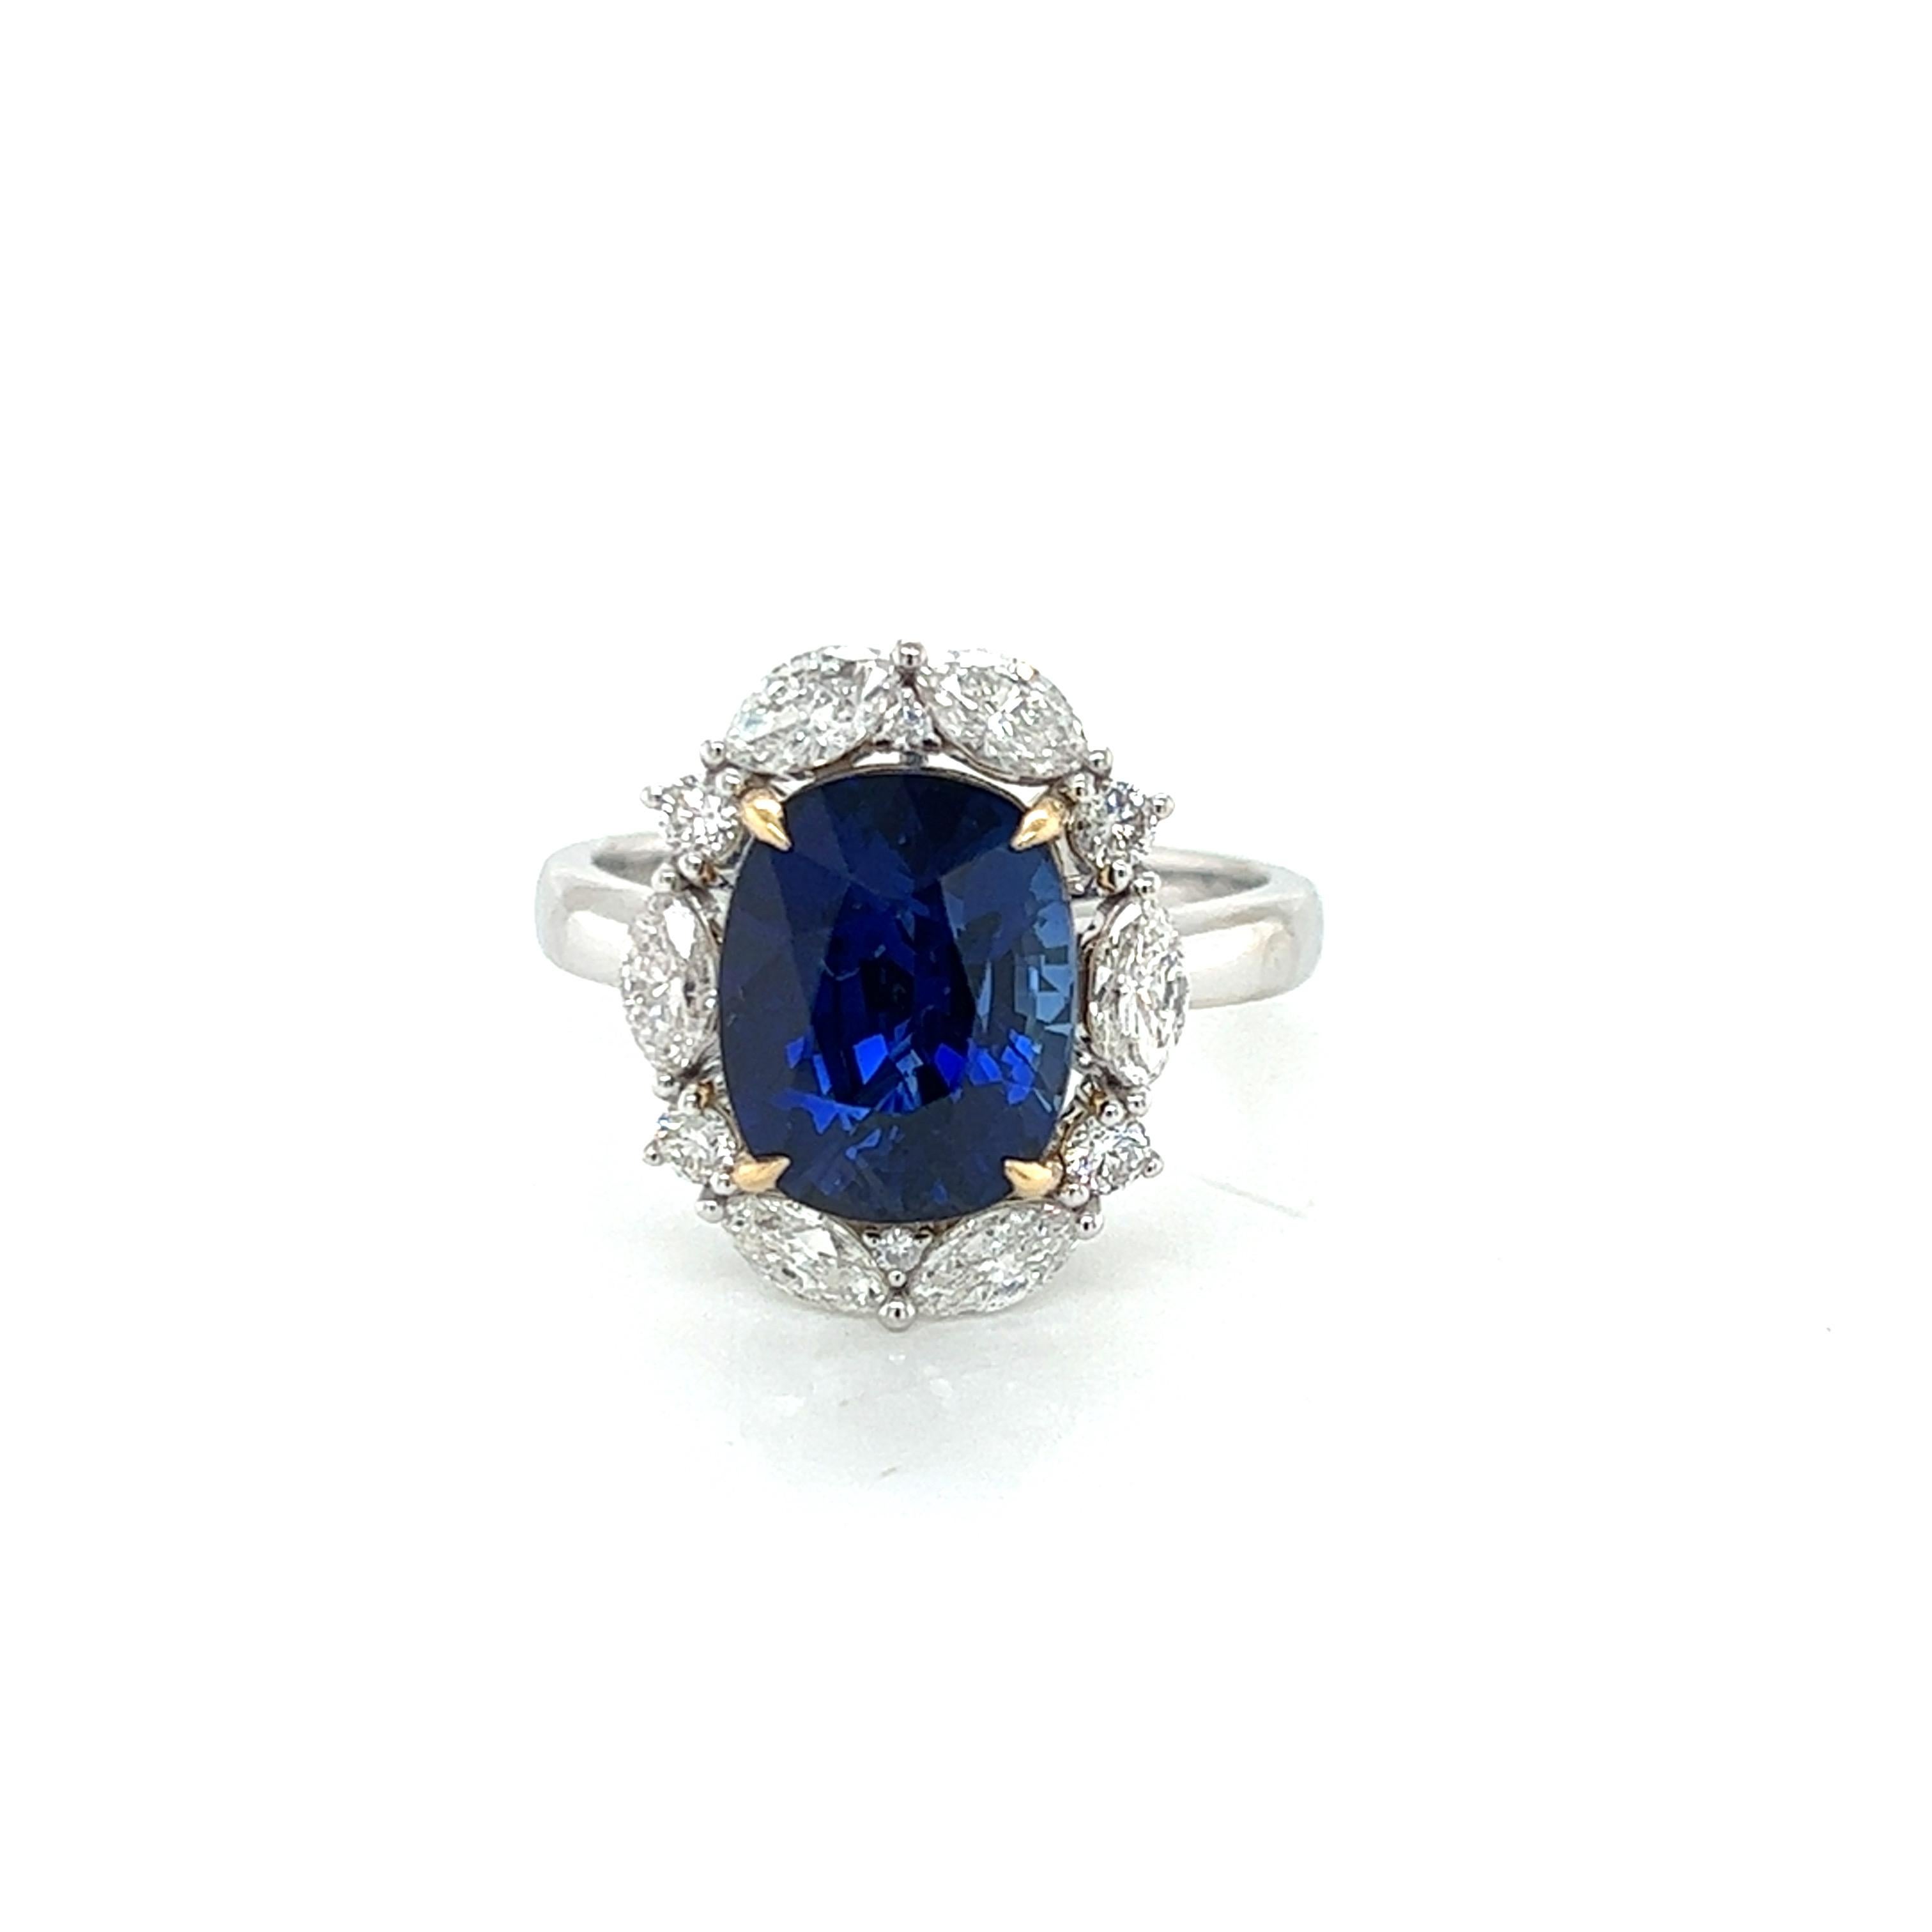 Introducing the breathtaking 6 Carat Blue Sapphire and Diamond Marquise Ring, a truly exquisite piece of jewelry that embodies luxury and sophistication. This ring features a stunning elongated cushion-cut blue sapphire, weighing an impressive 6